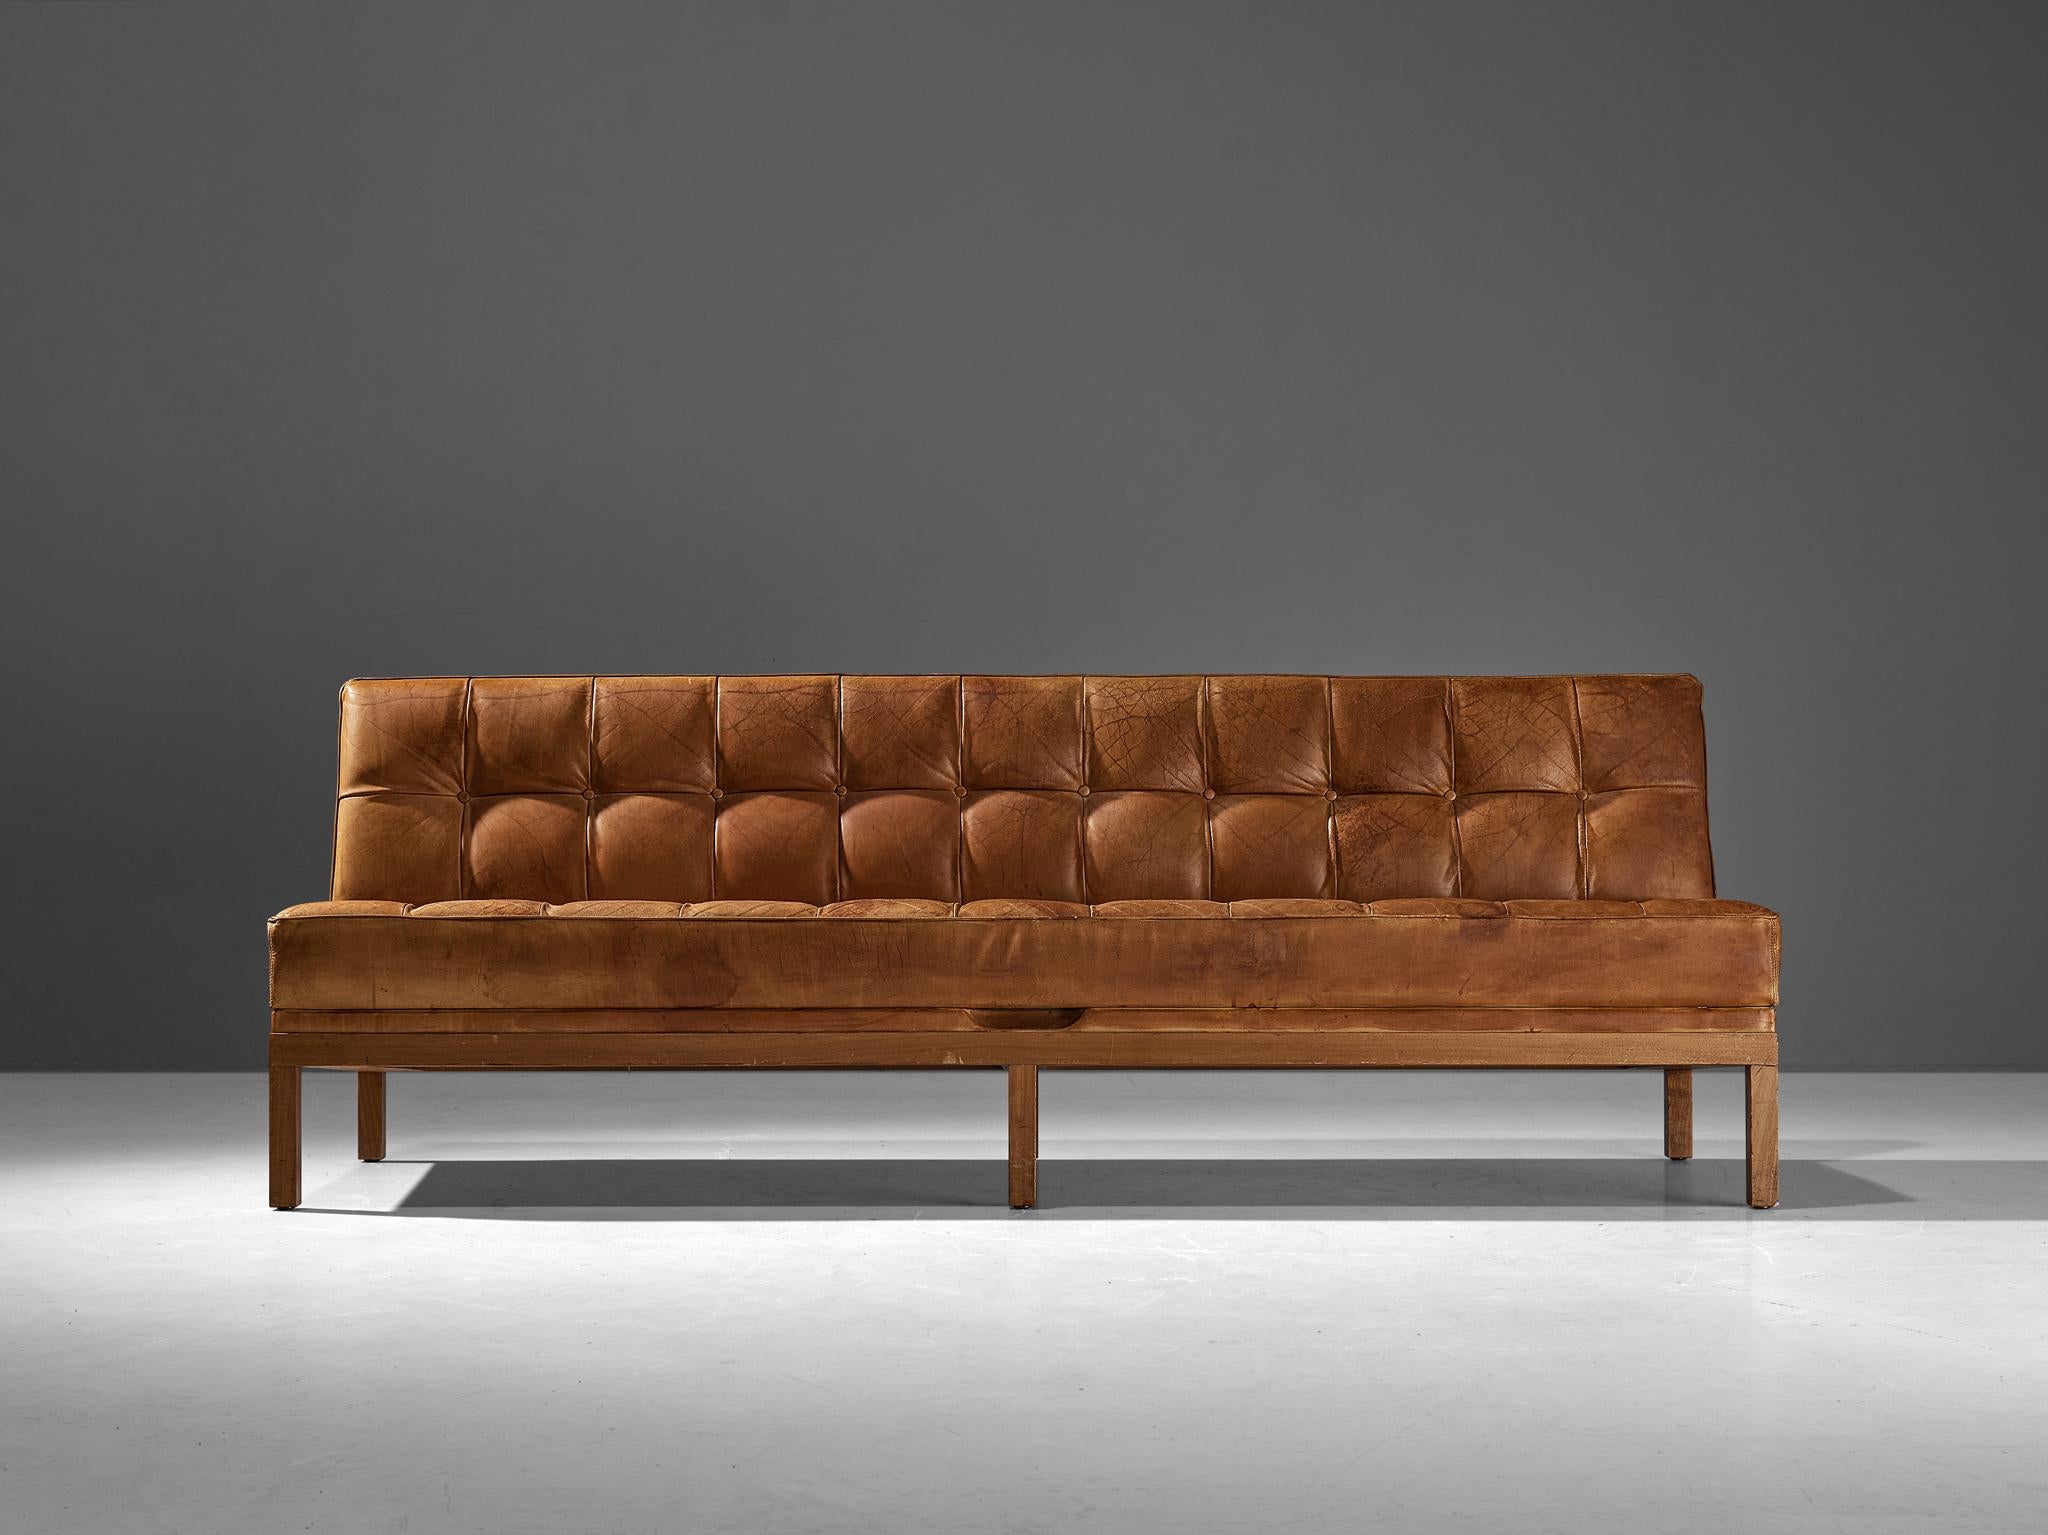 Johannes Spalt for Wittmann, cognac leather, teak, Austria, 1960s.

This Austrian daybed is named 'Constanze'. This item is designed by Johannes Spalt and manufactured by Wittmann. This early model, with teak frame and cognac leather is wonderfully